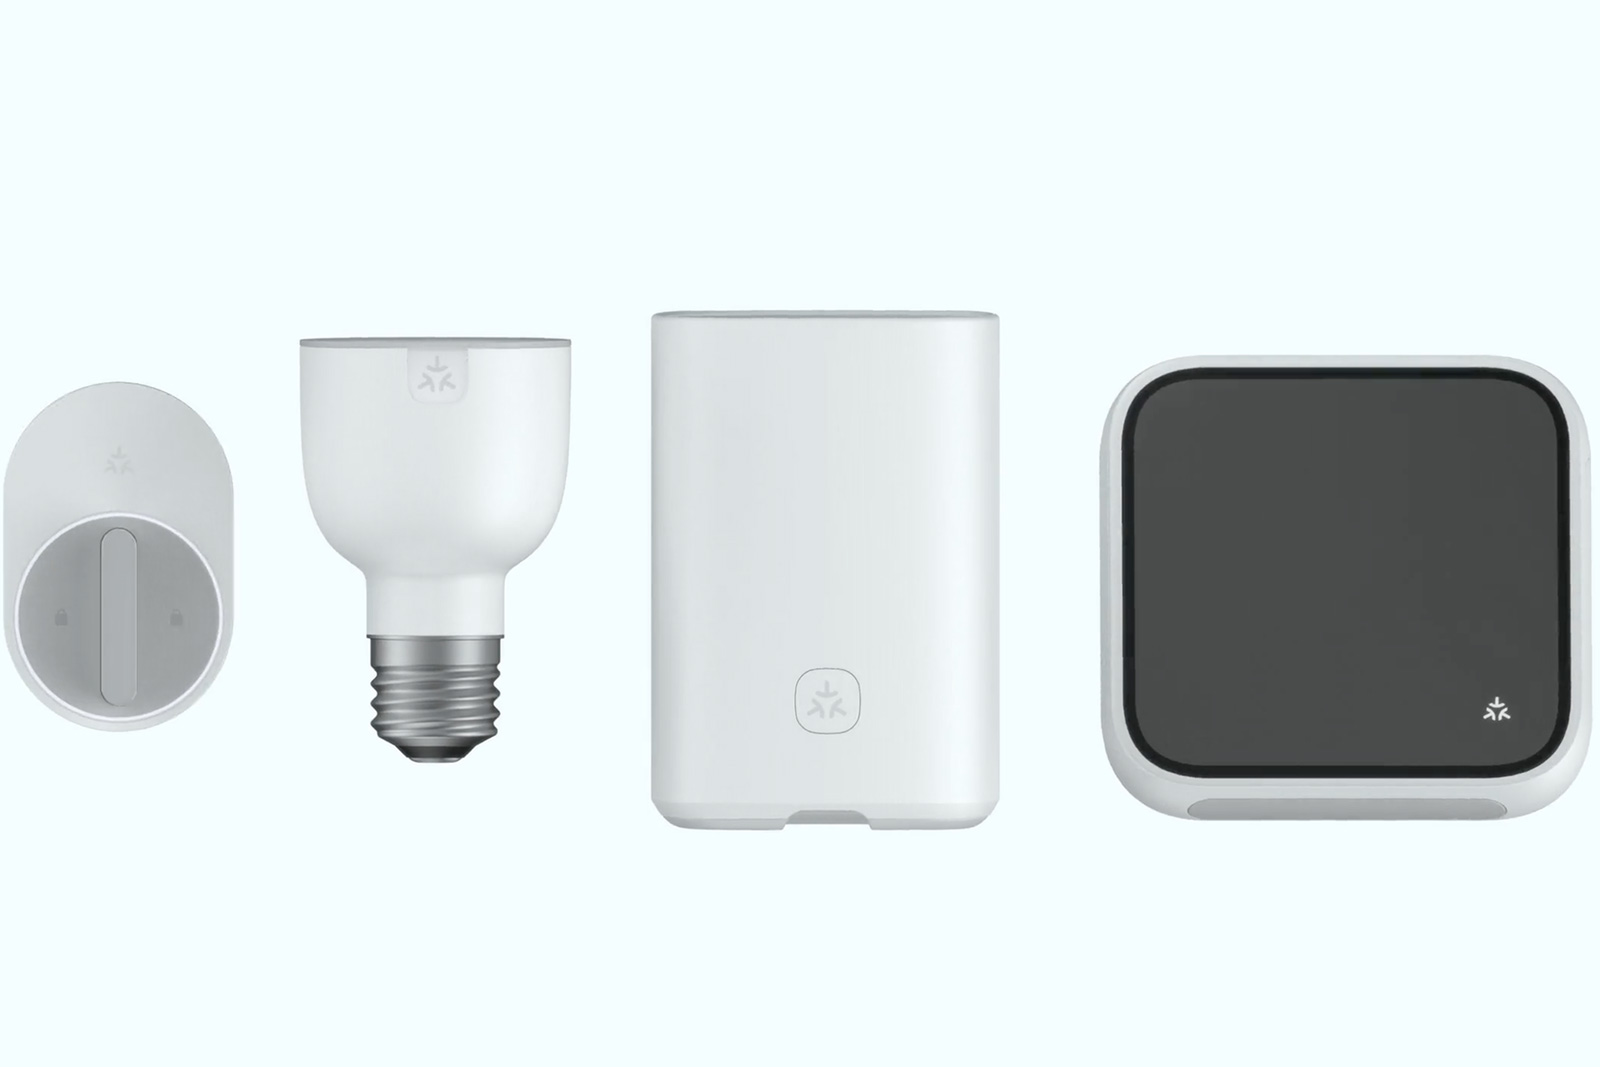 Matter smart home devices